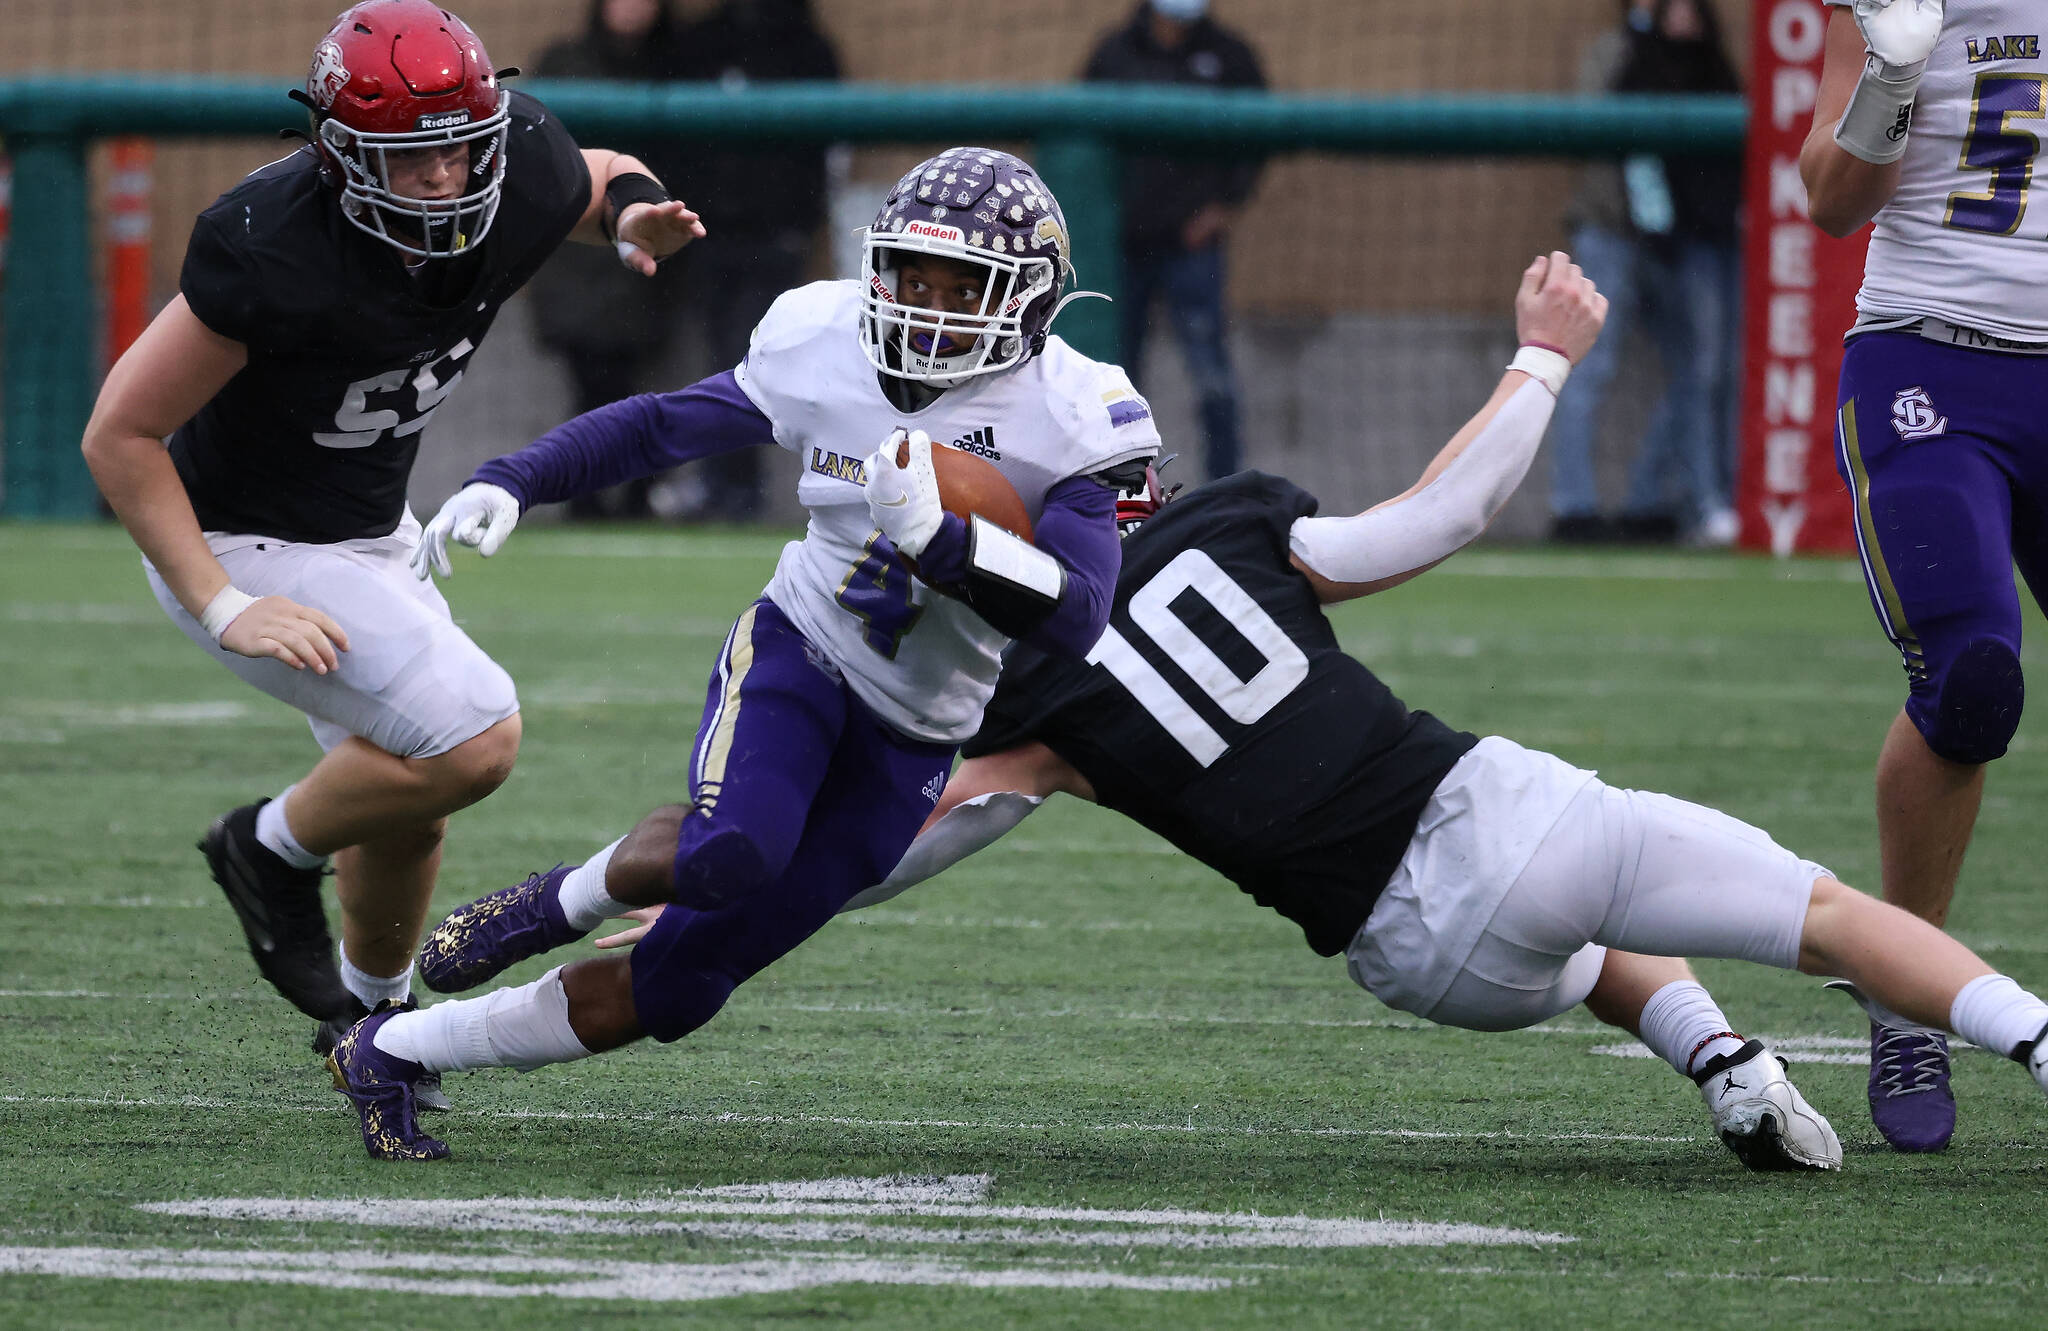 The Vikings will try to find ways to get playmakers like Trayce Hanks into open space. (Andy Bronson / The Herald)